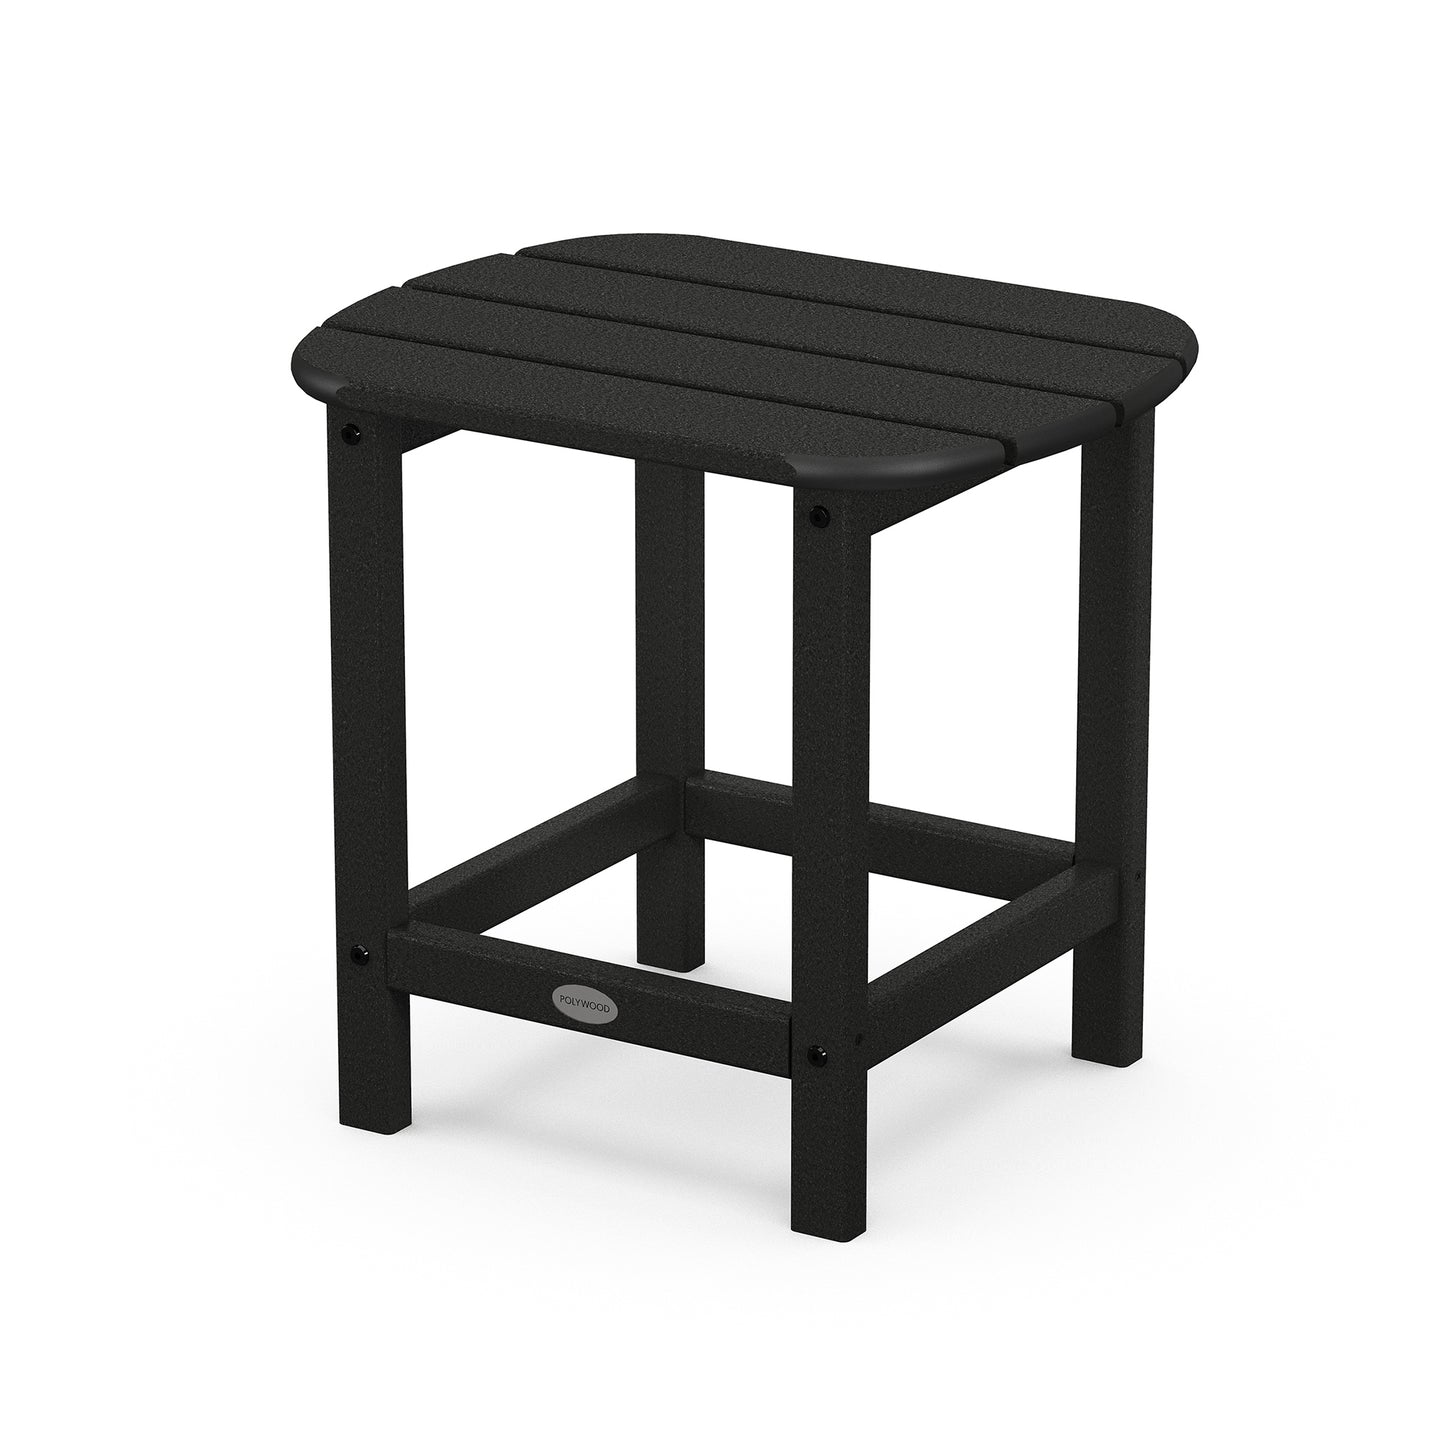 A black, square, POLYWOOD® South Beach Adirondack 18" Side Table with a slatted top and sturdy legs, isolated on a white background.